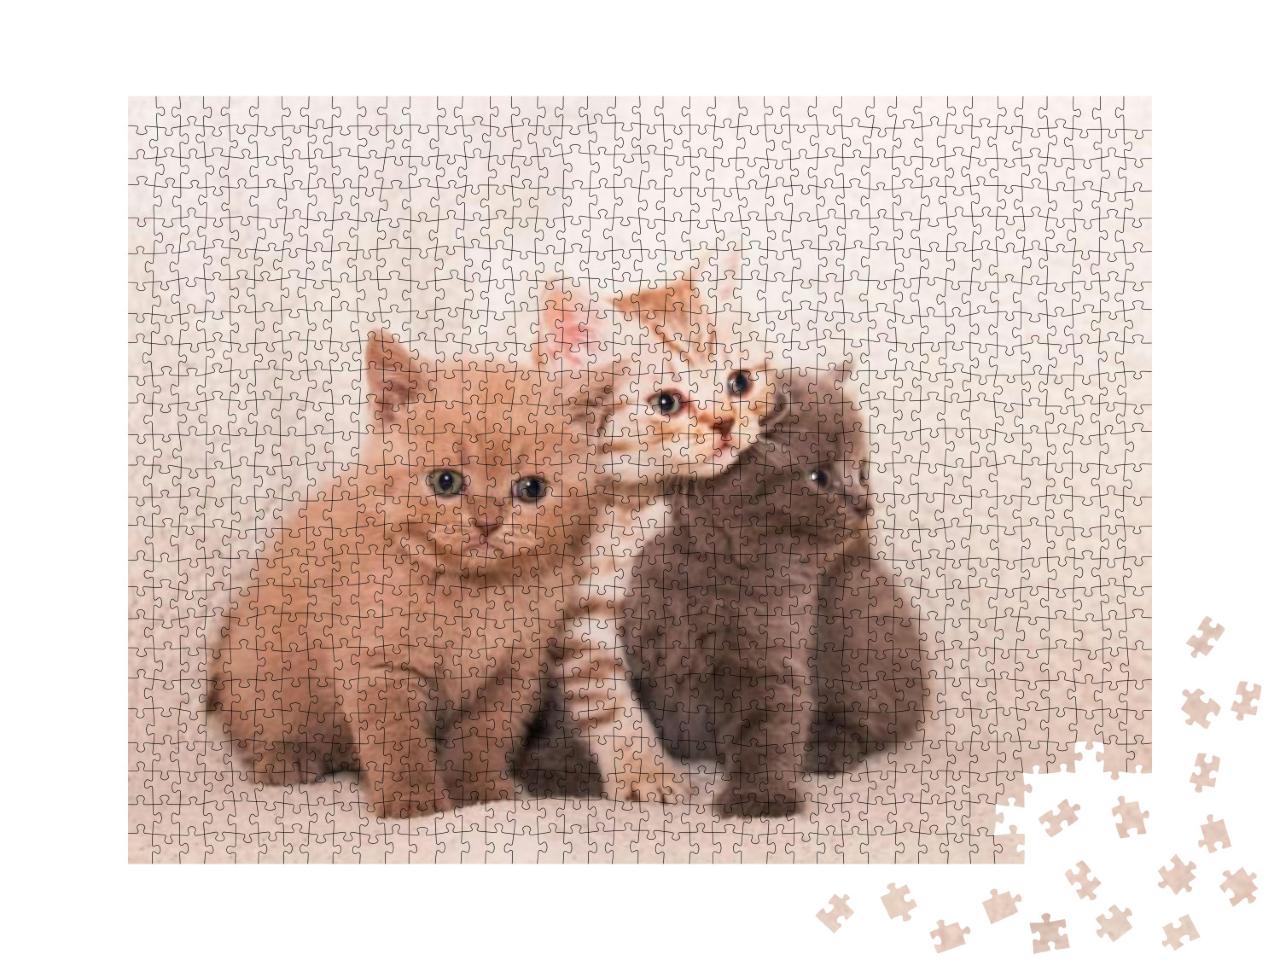 Three British Kittens on a White Plaid... Jigsaw Puzzle with 1000 pieces